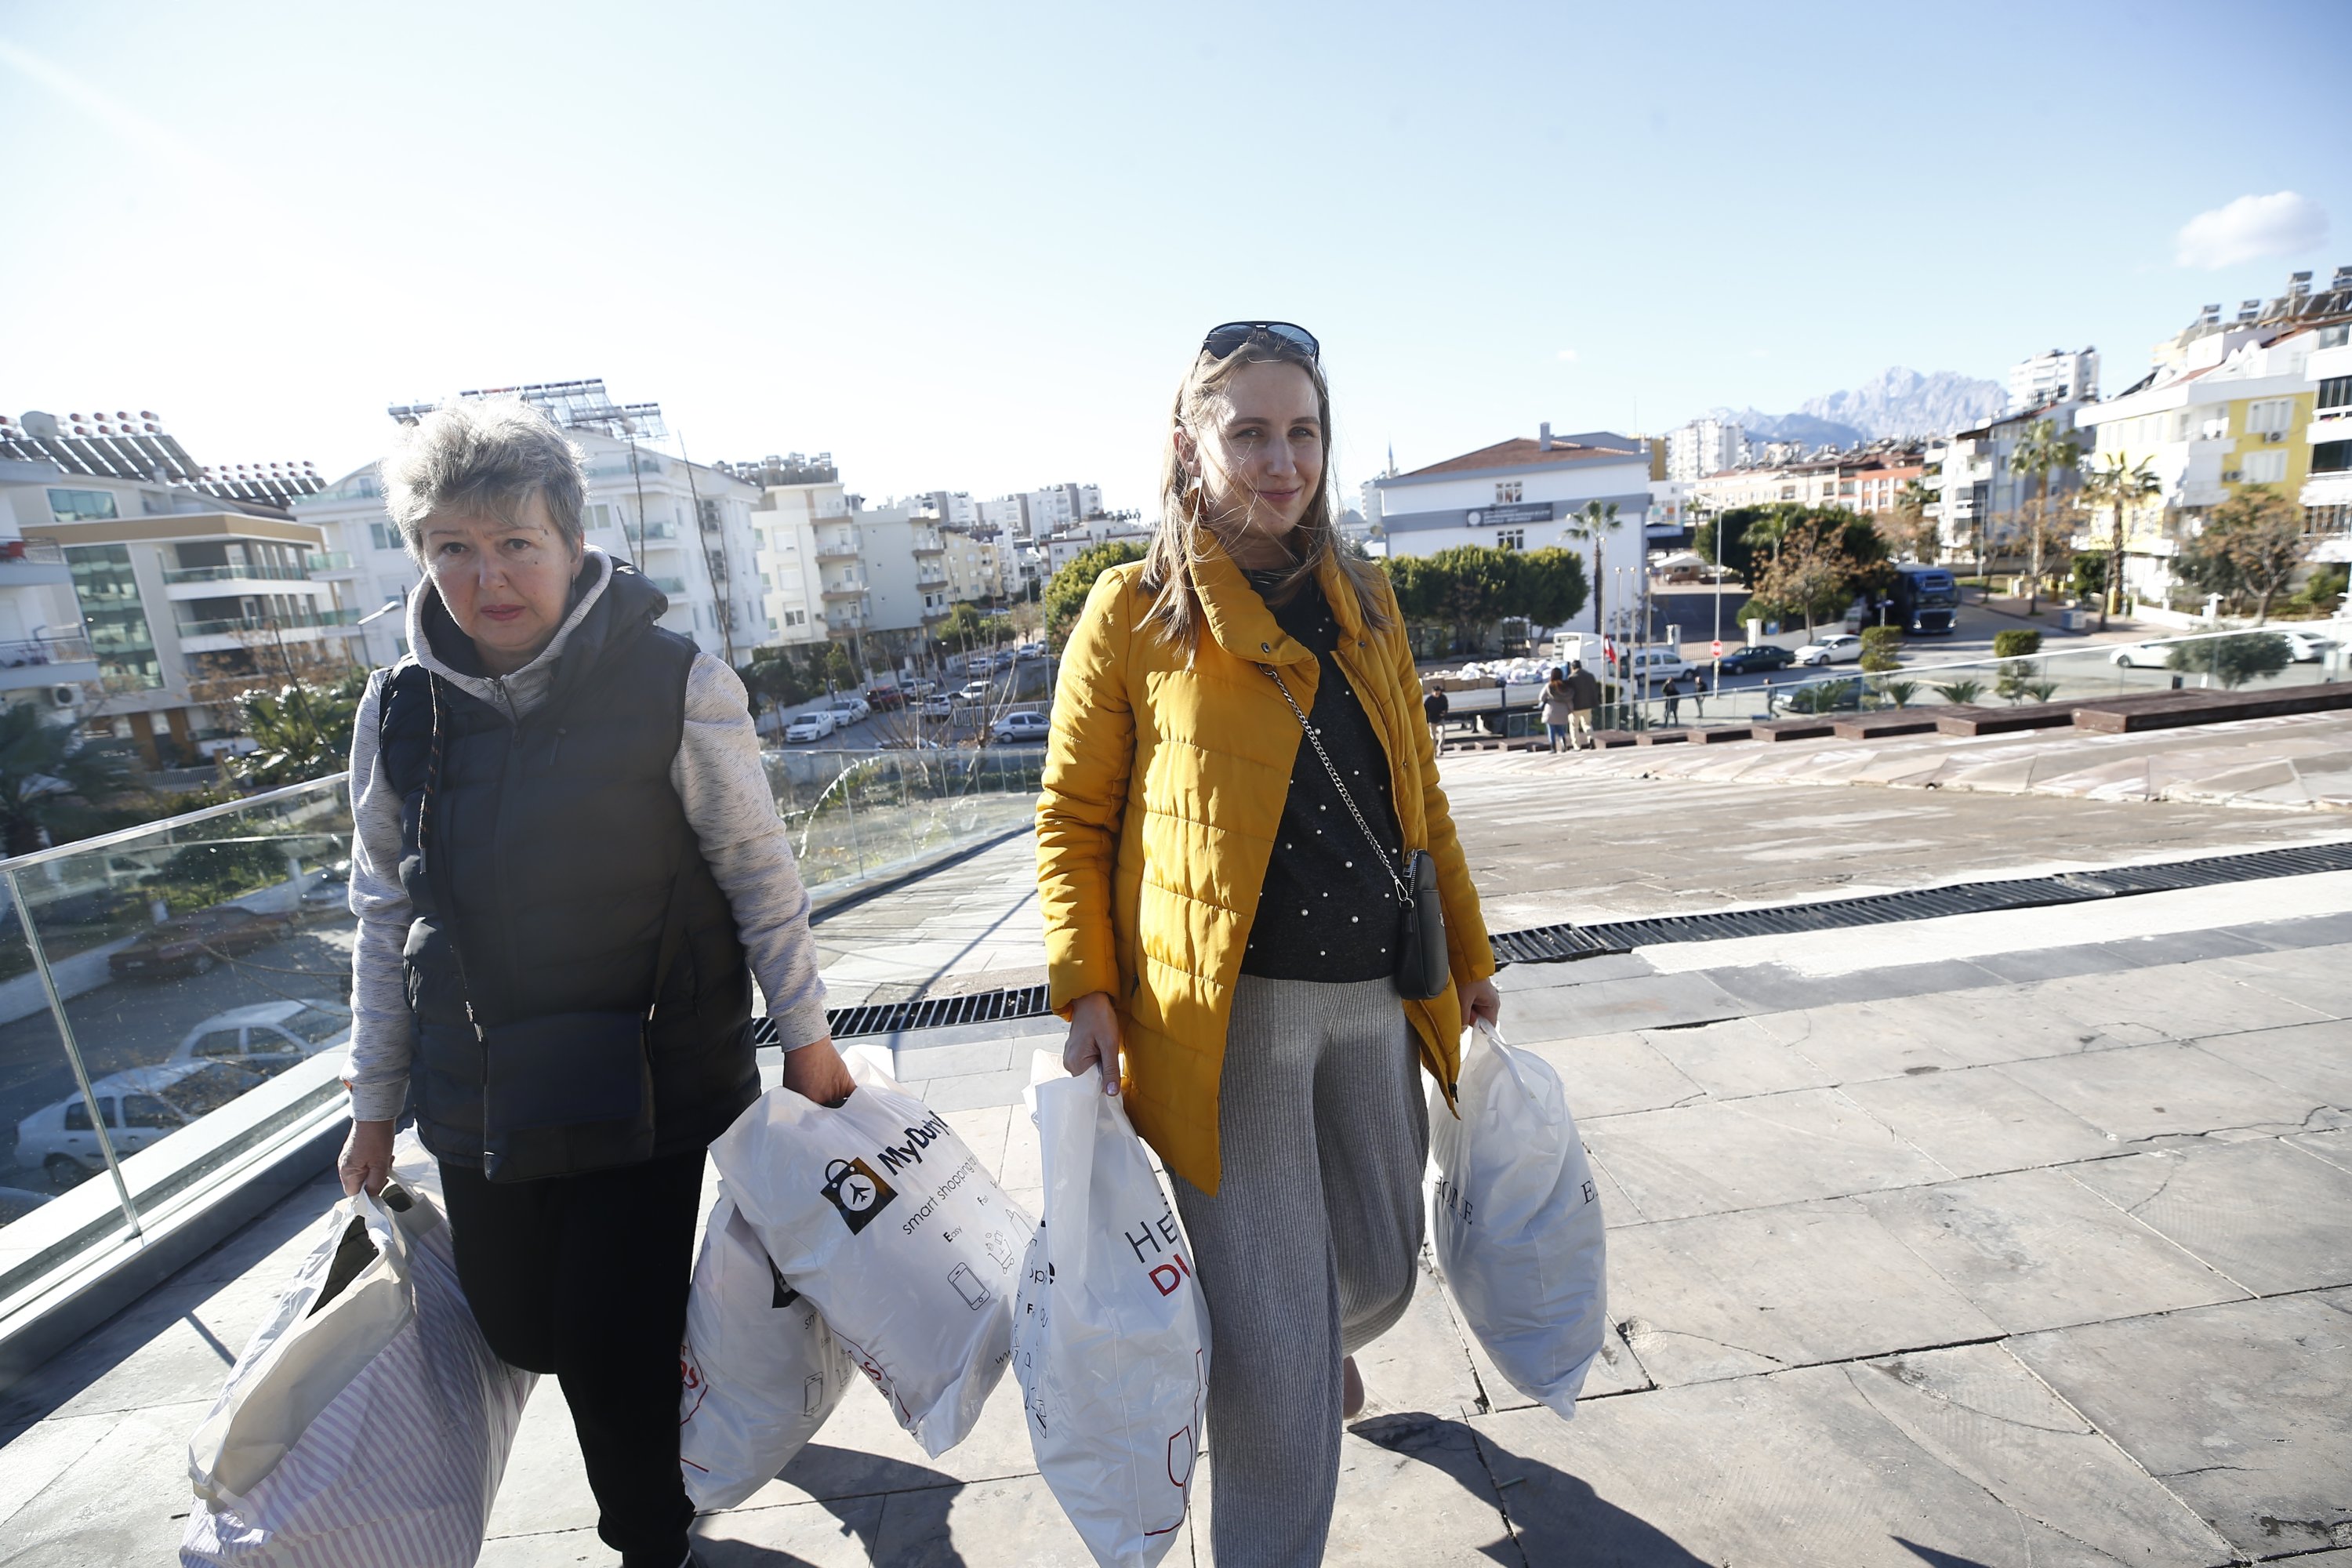 Anna Aba (L) from Ukraine, who has been living in Antalya for 12 years, donates some winter clothing for the earthquake victims, Antalya, Tόrkiye, Feb. 7, 2023. (AA Photo)